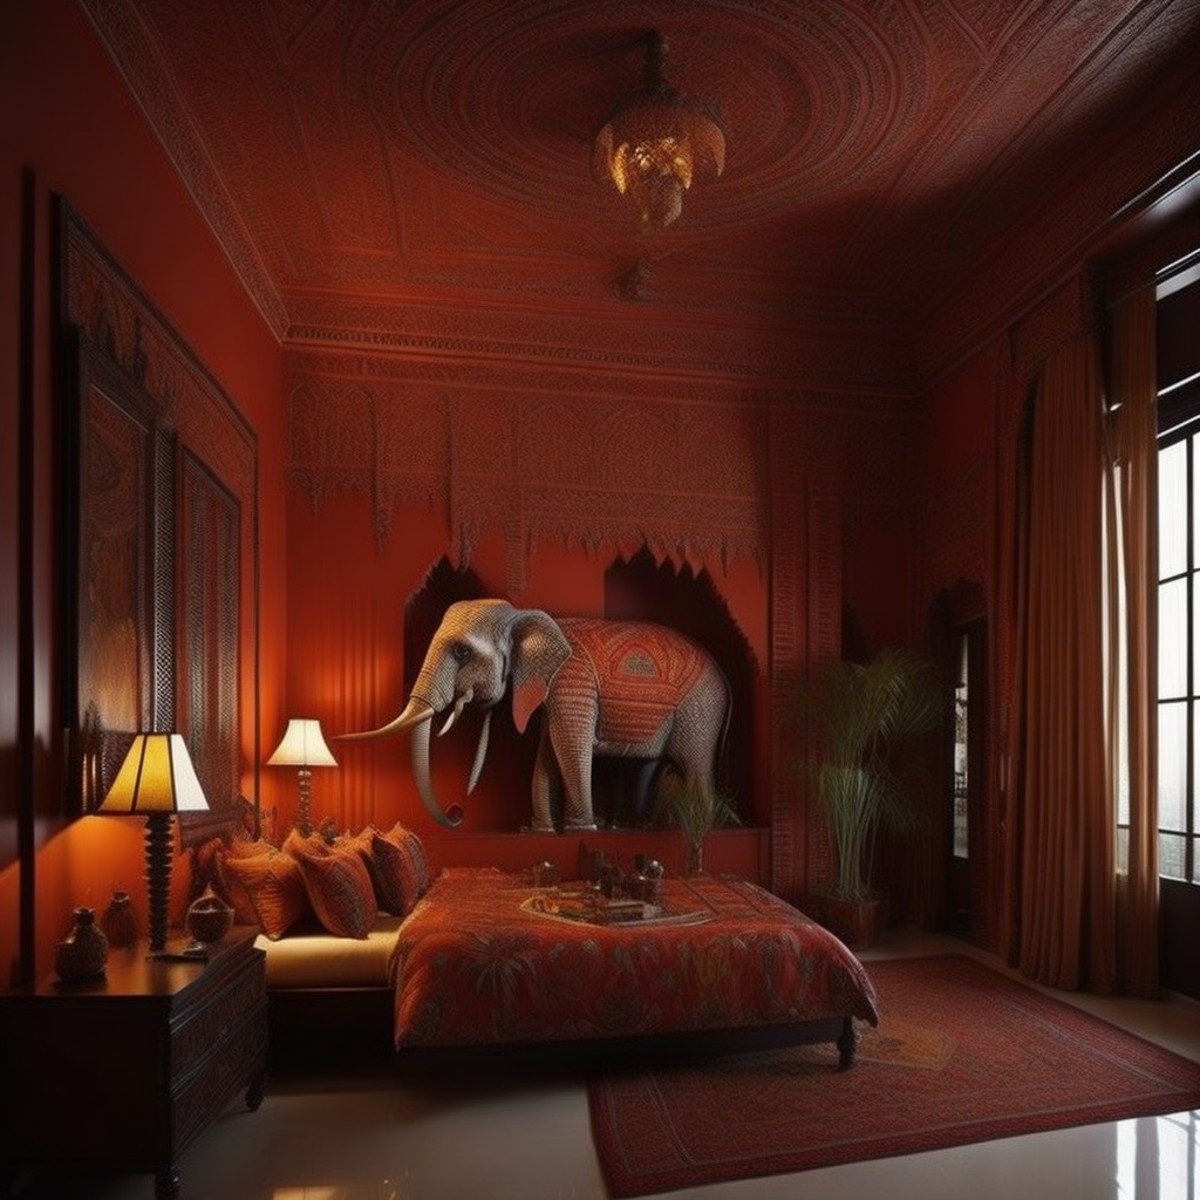 02105-2825858523-Indian style interior design of badroom with elephant.png